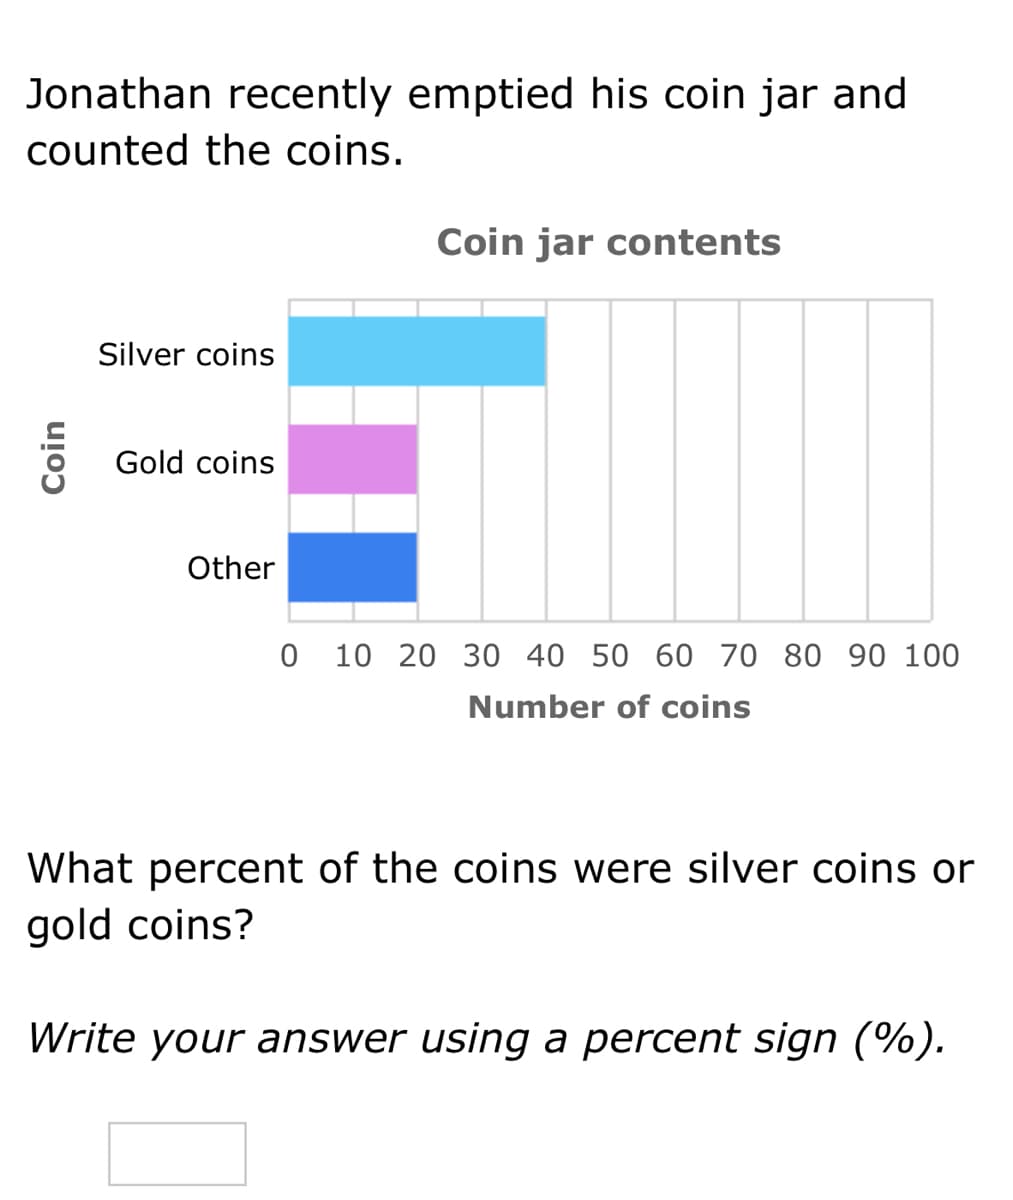 Jonathan recently emptied his coin jar and
counted the coins.
Coin jar contents
Silver coins
Gold coins
Other
O 10 20 30 40 50 60 70 80 90 100
Number of coins
What percent of the coins were silver coins or
gold coins?
Write your answer using a percent sign (%).
Coin
